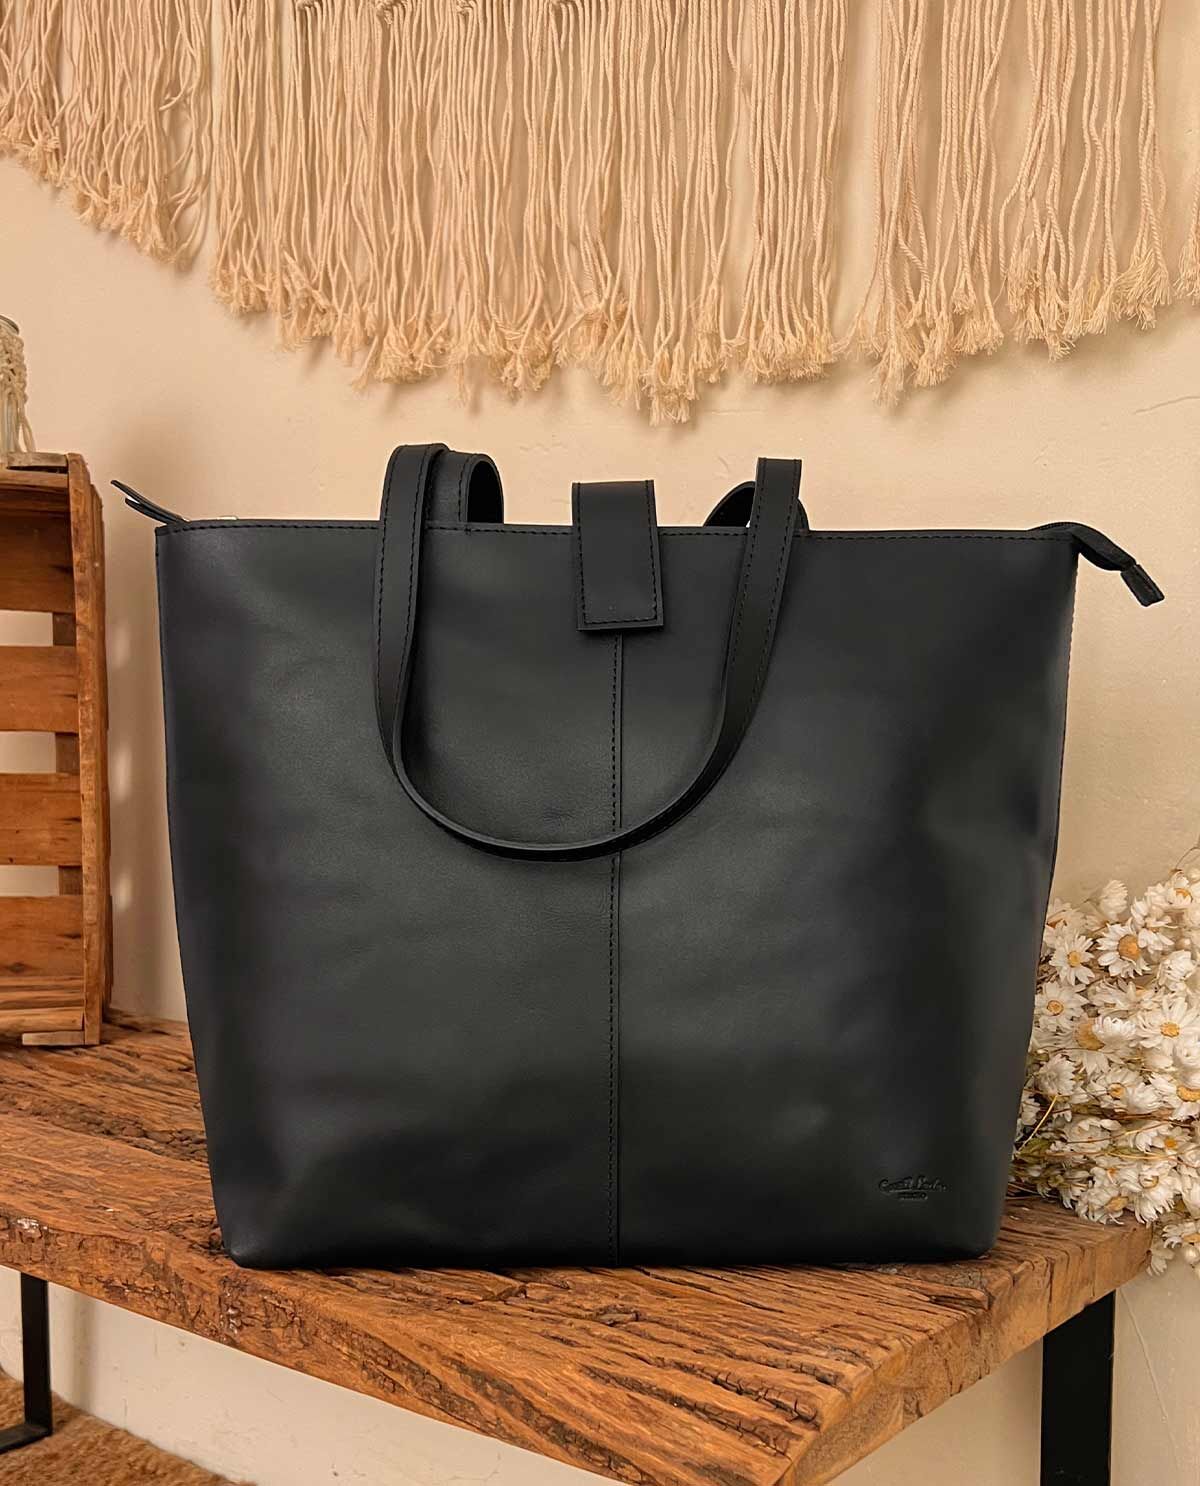 Cow Leather Handbags for Women Small Tote Bags India